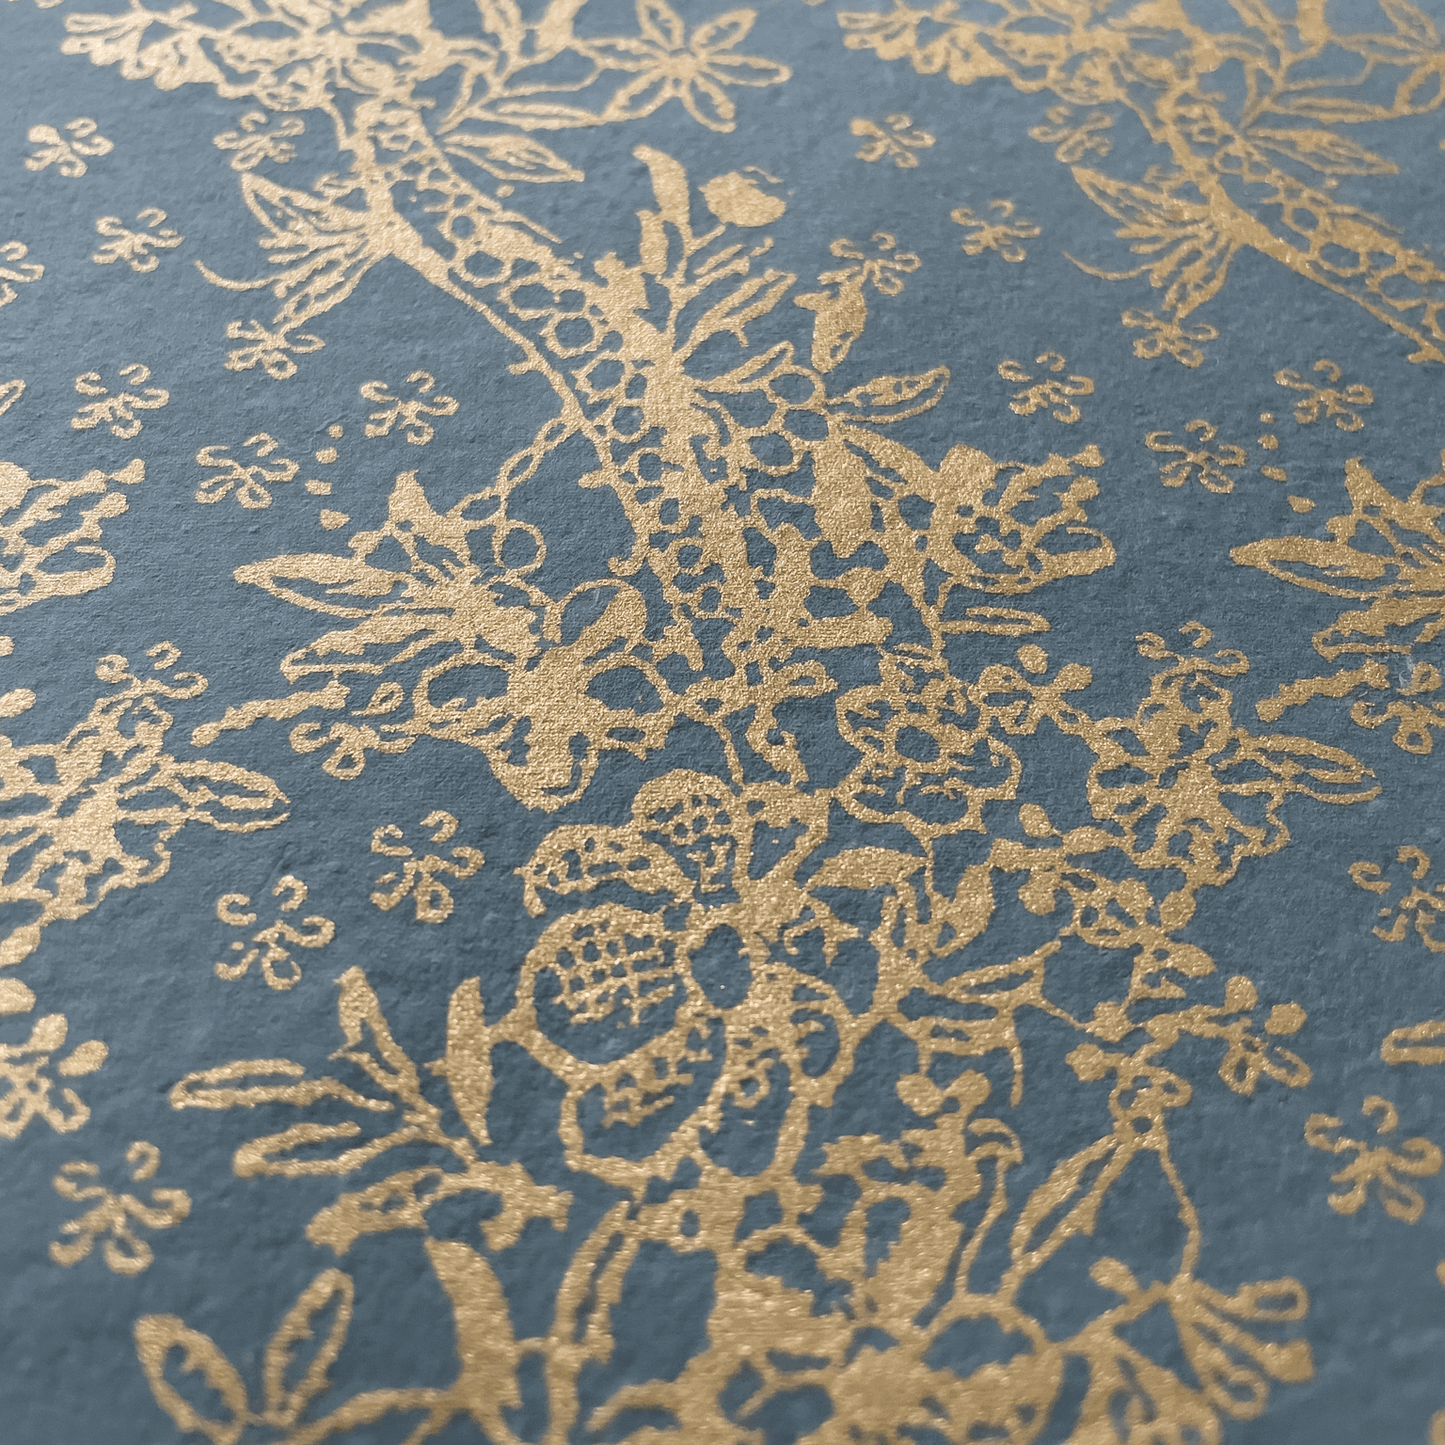 grey-and-gold-patterned-recycled-paper